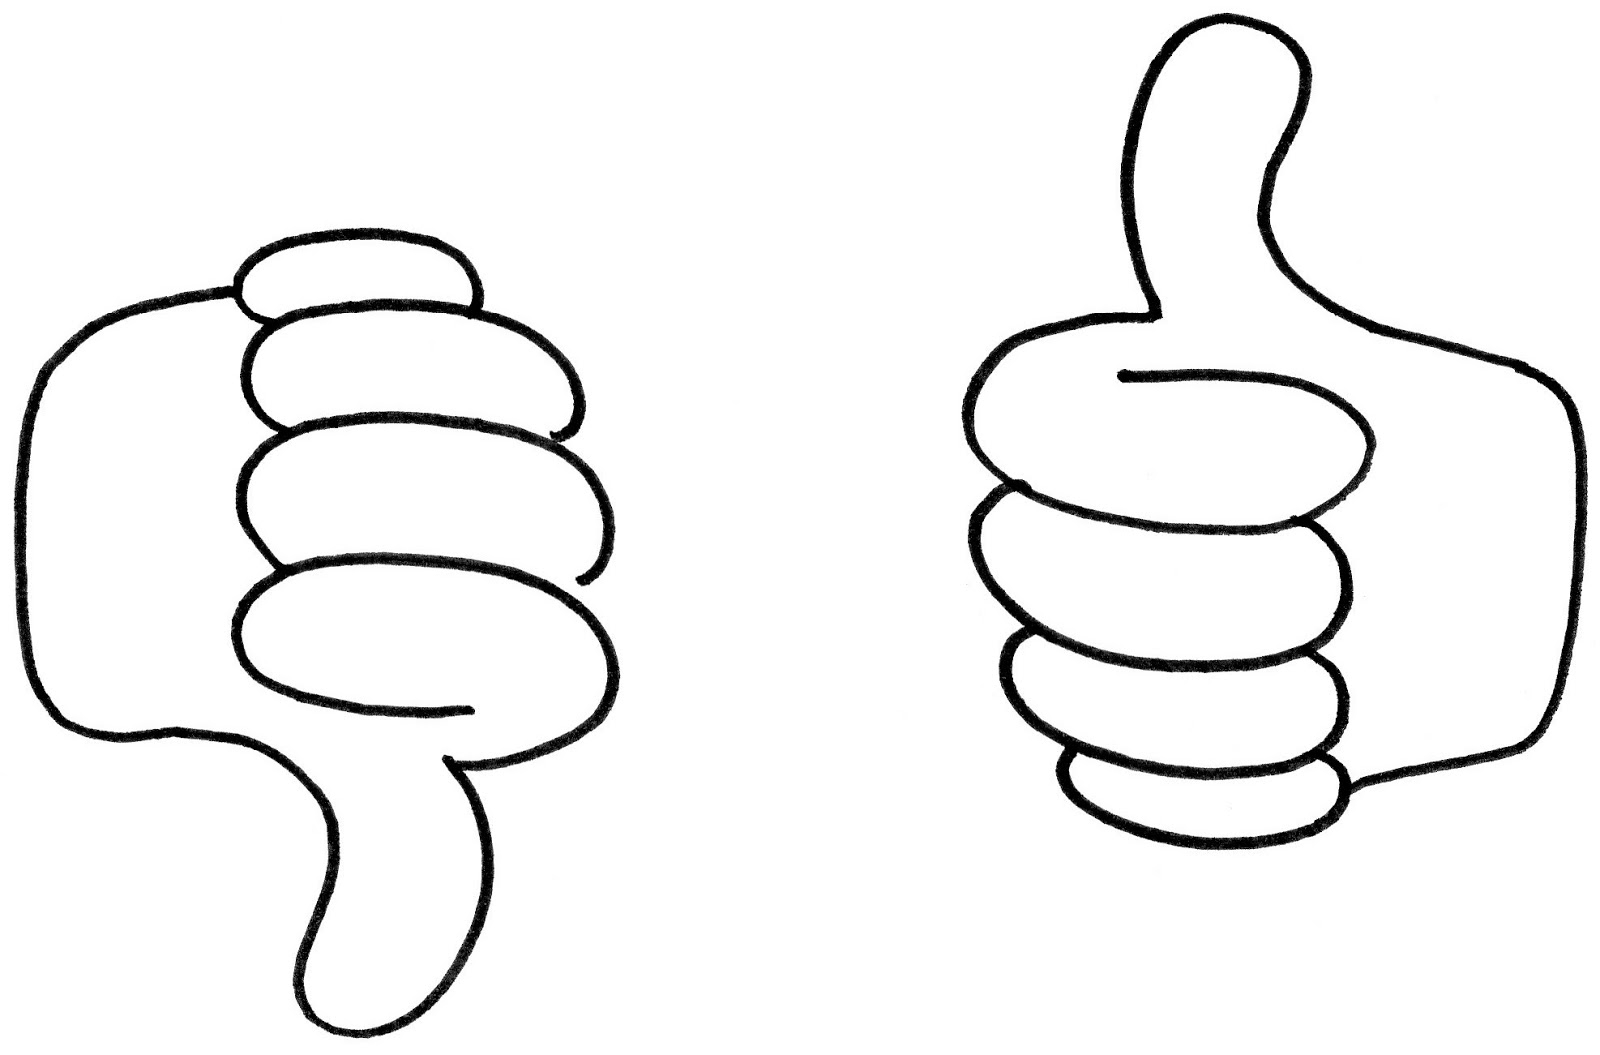 Thumbs Up And Down Clipart.